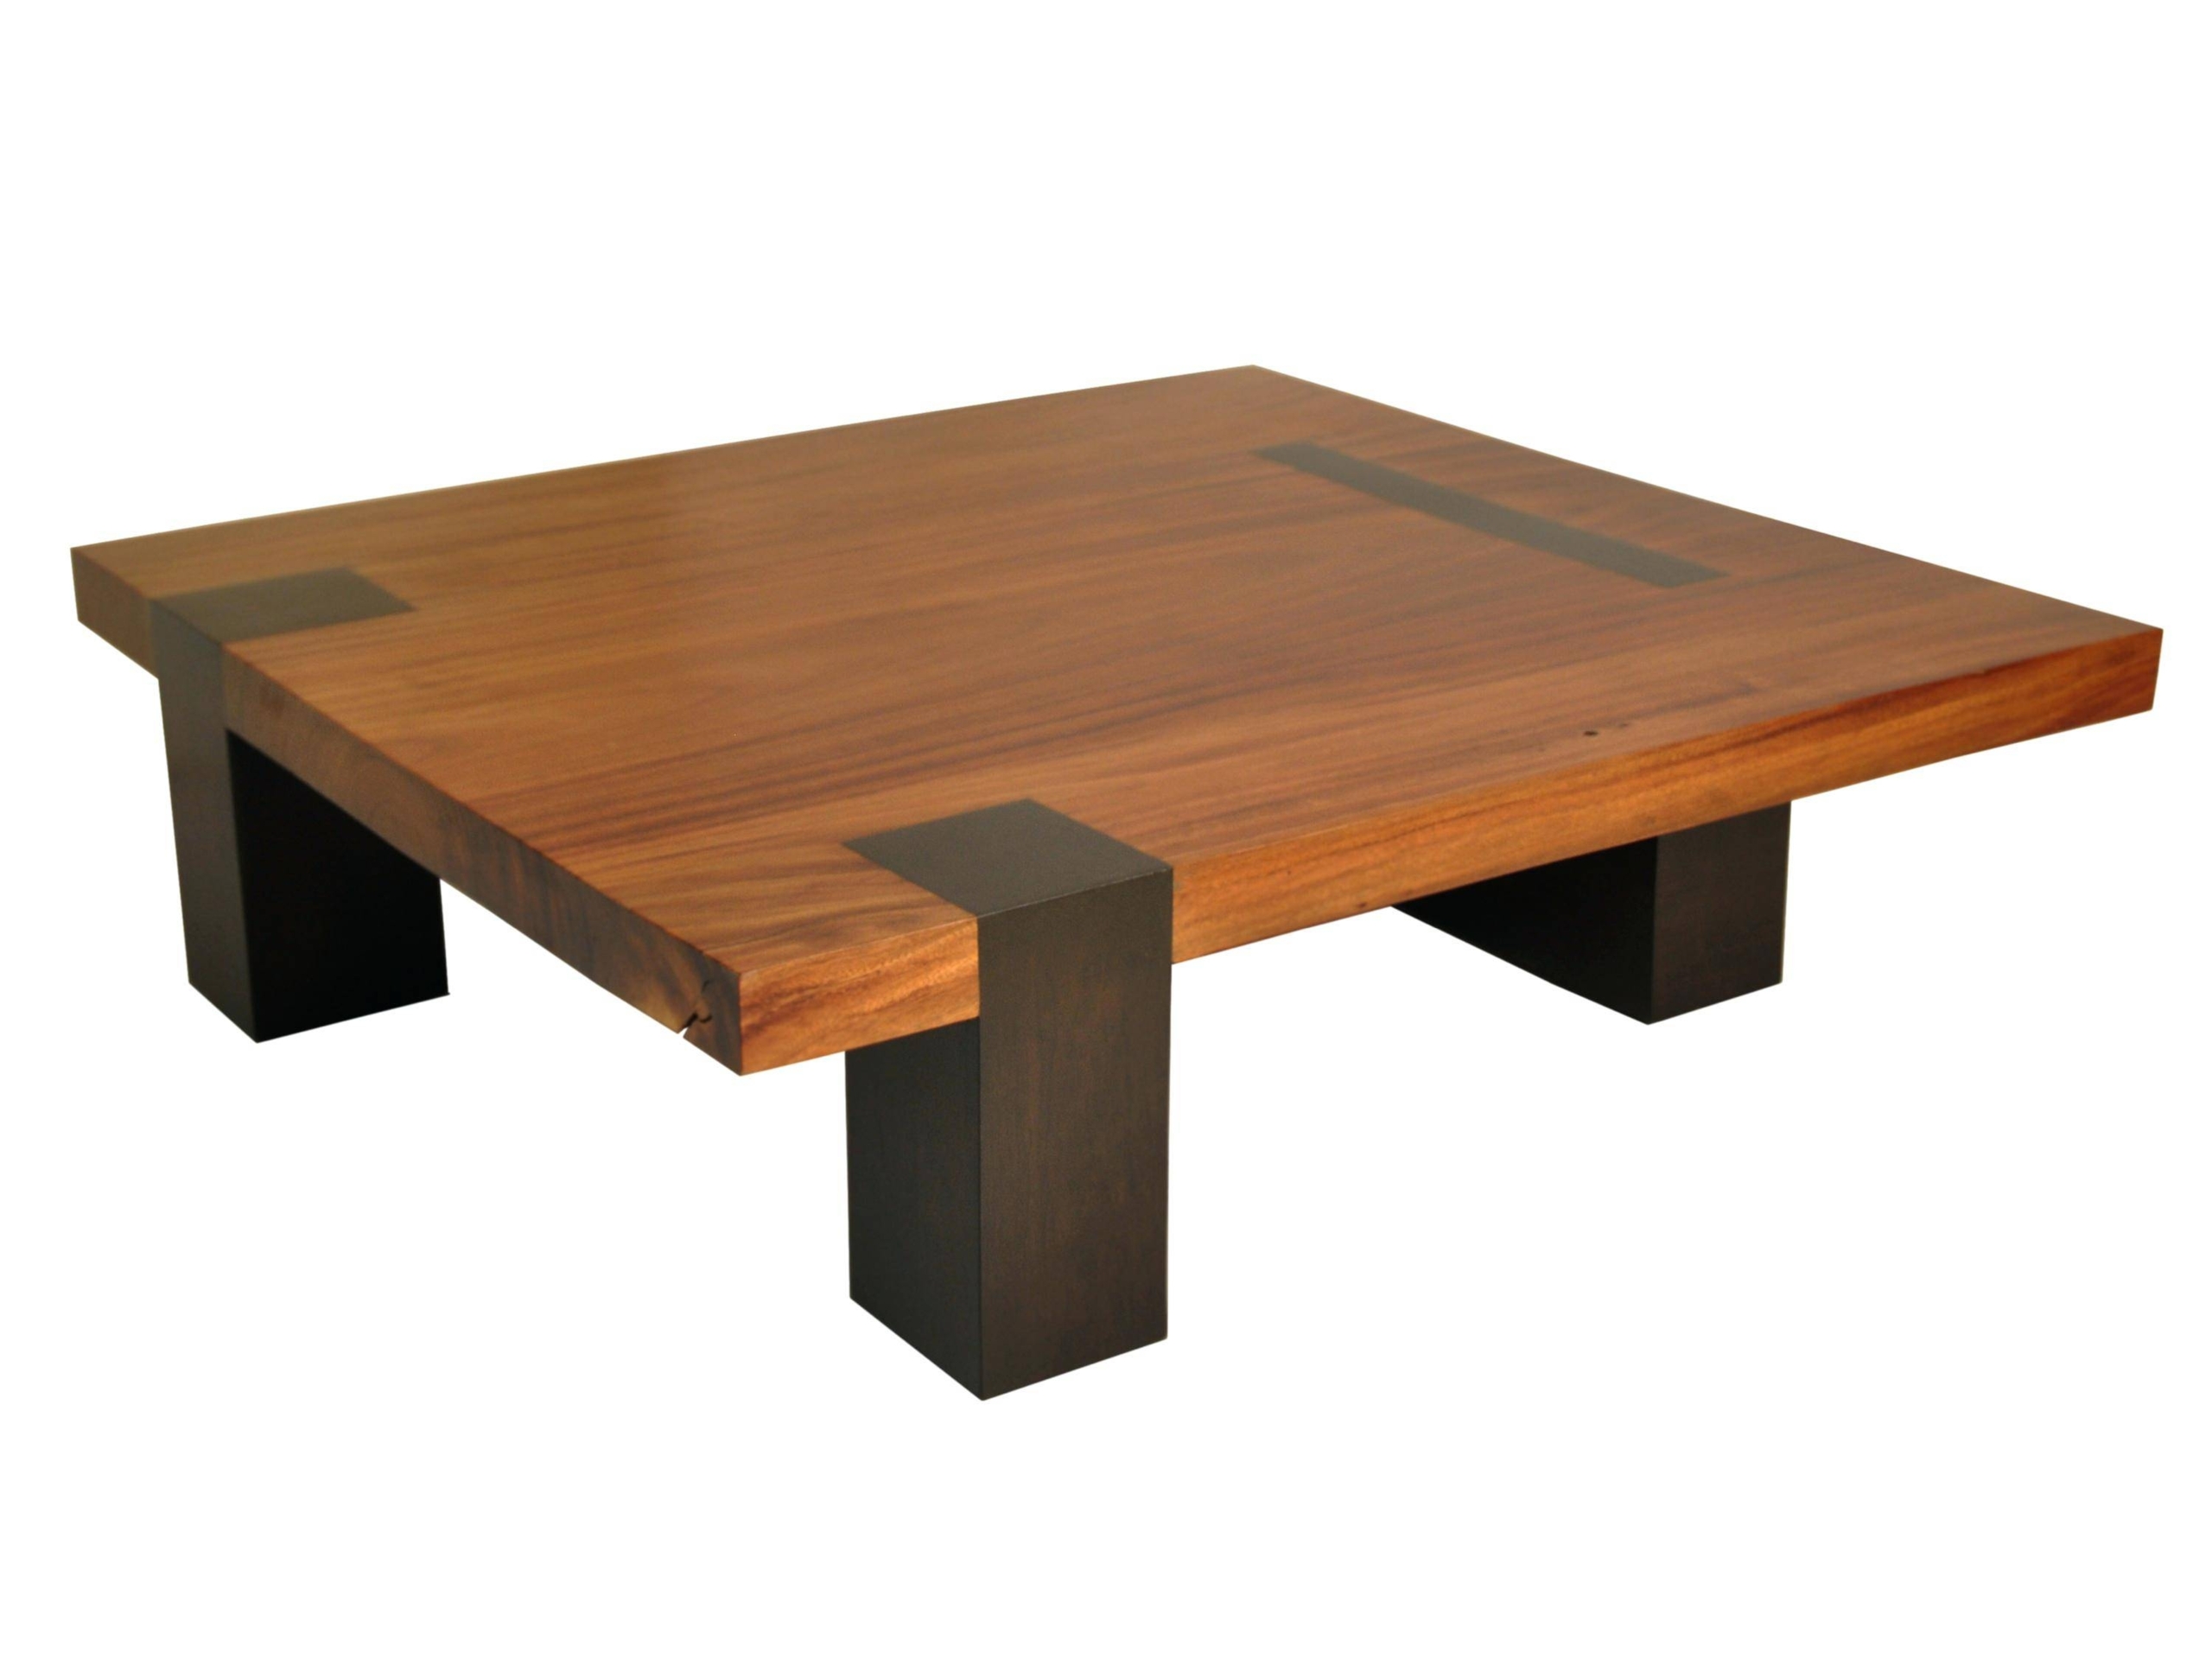 Large square wood coffee table